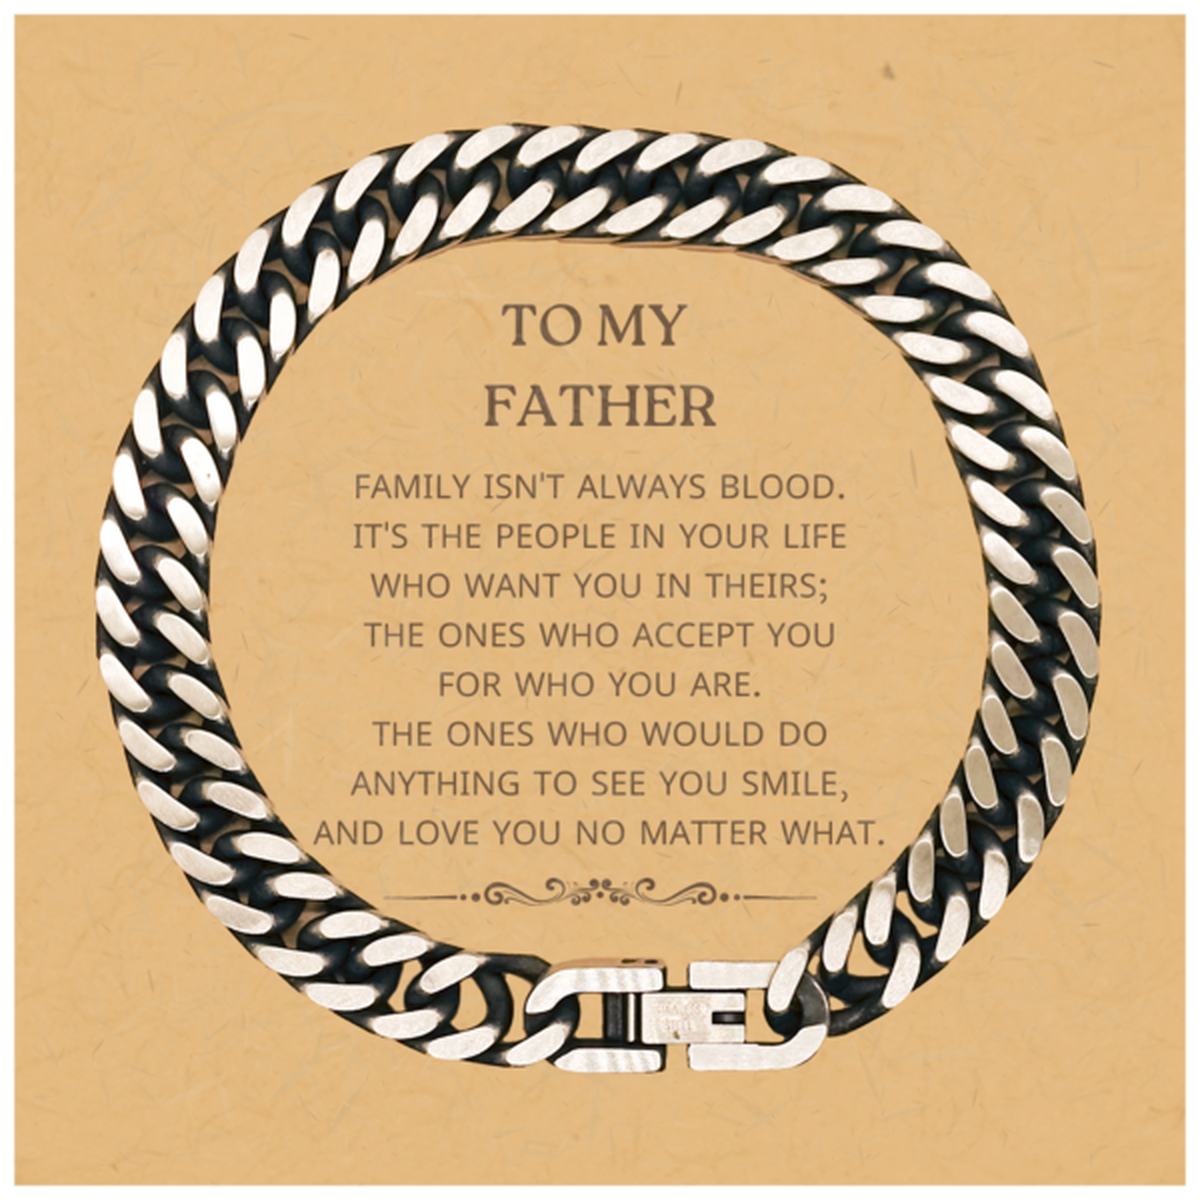 To My Father Gifts, Family isn't always blood, Father Cuban Link Chain Bracelet, Birthday Christmas Unique Present For Father